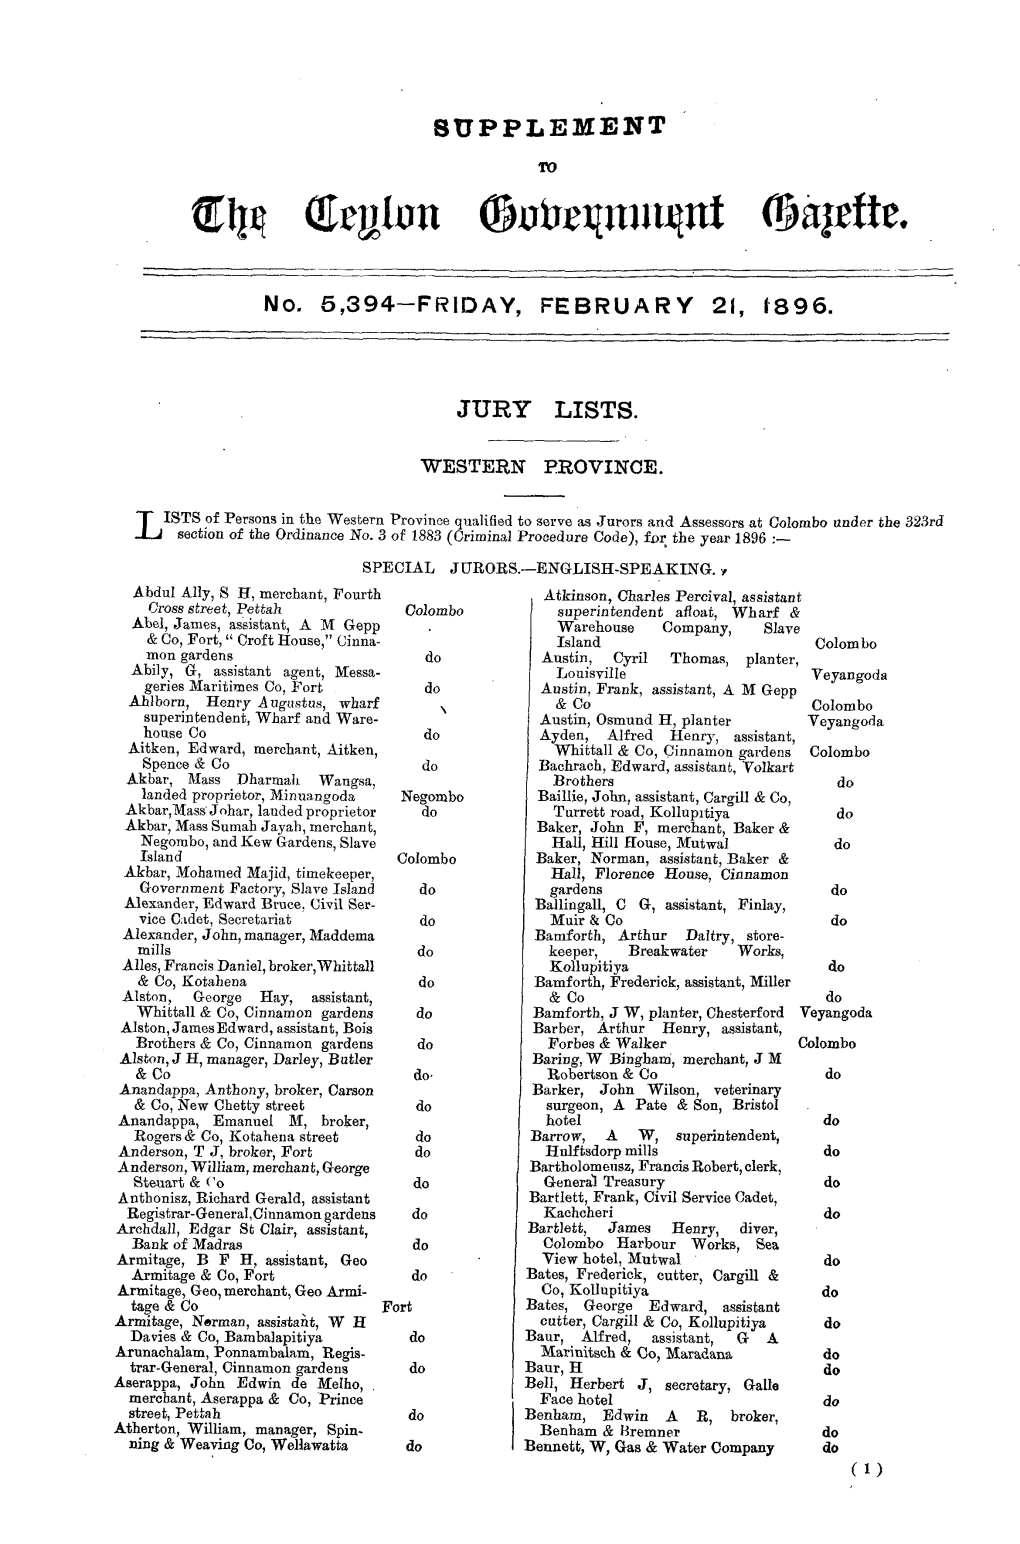 SUPPLEMENT No. 5,394-FRIDAY, FEBRUARY 21, 1896